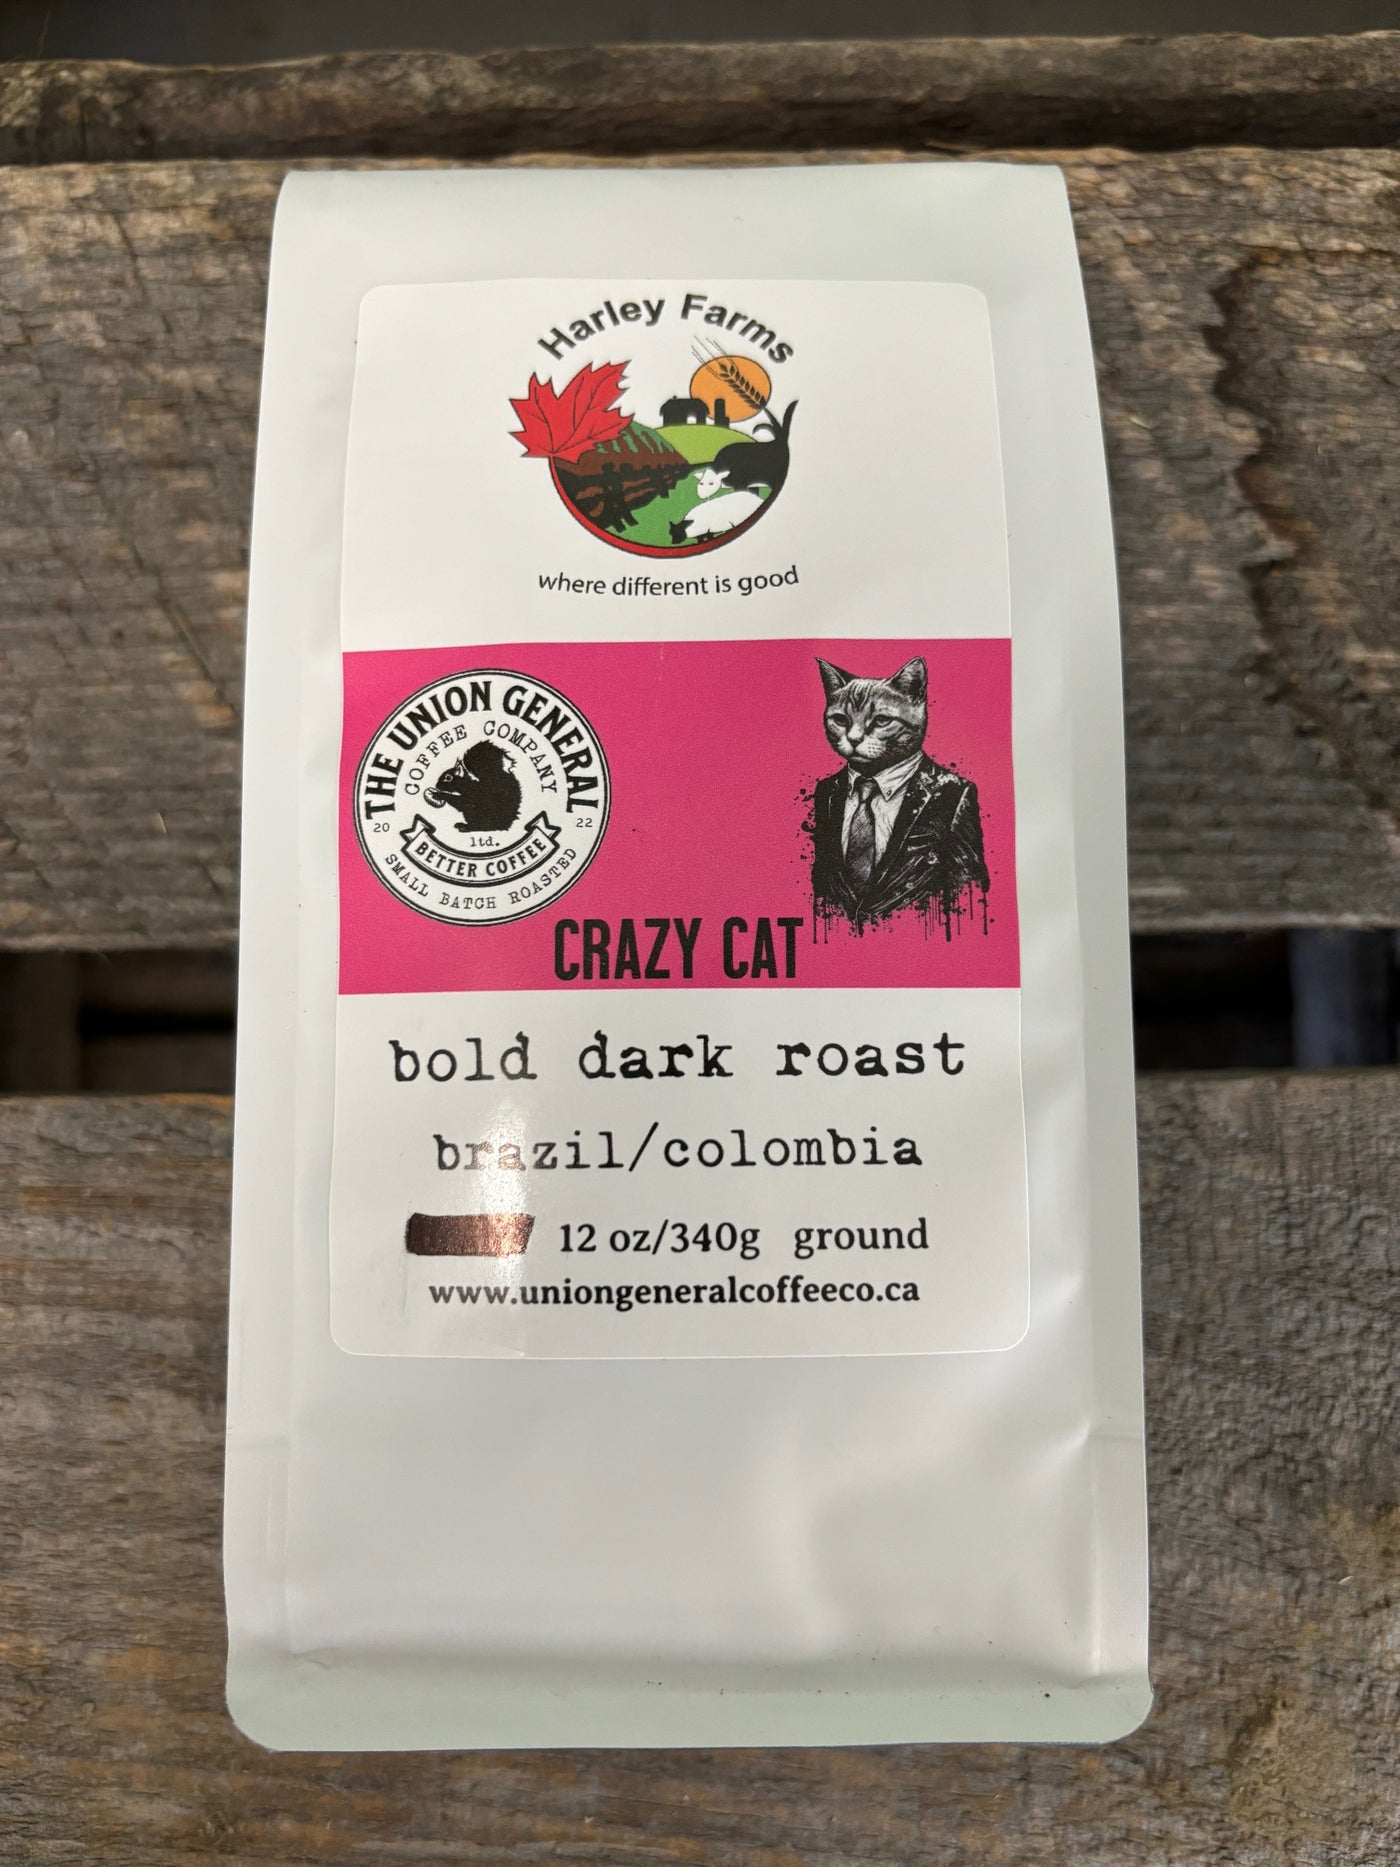 The Union General Coffee Company- Crazy Cat